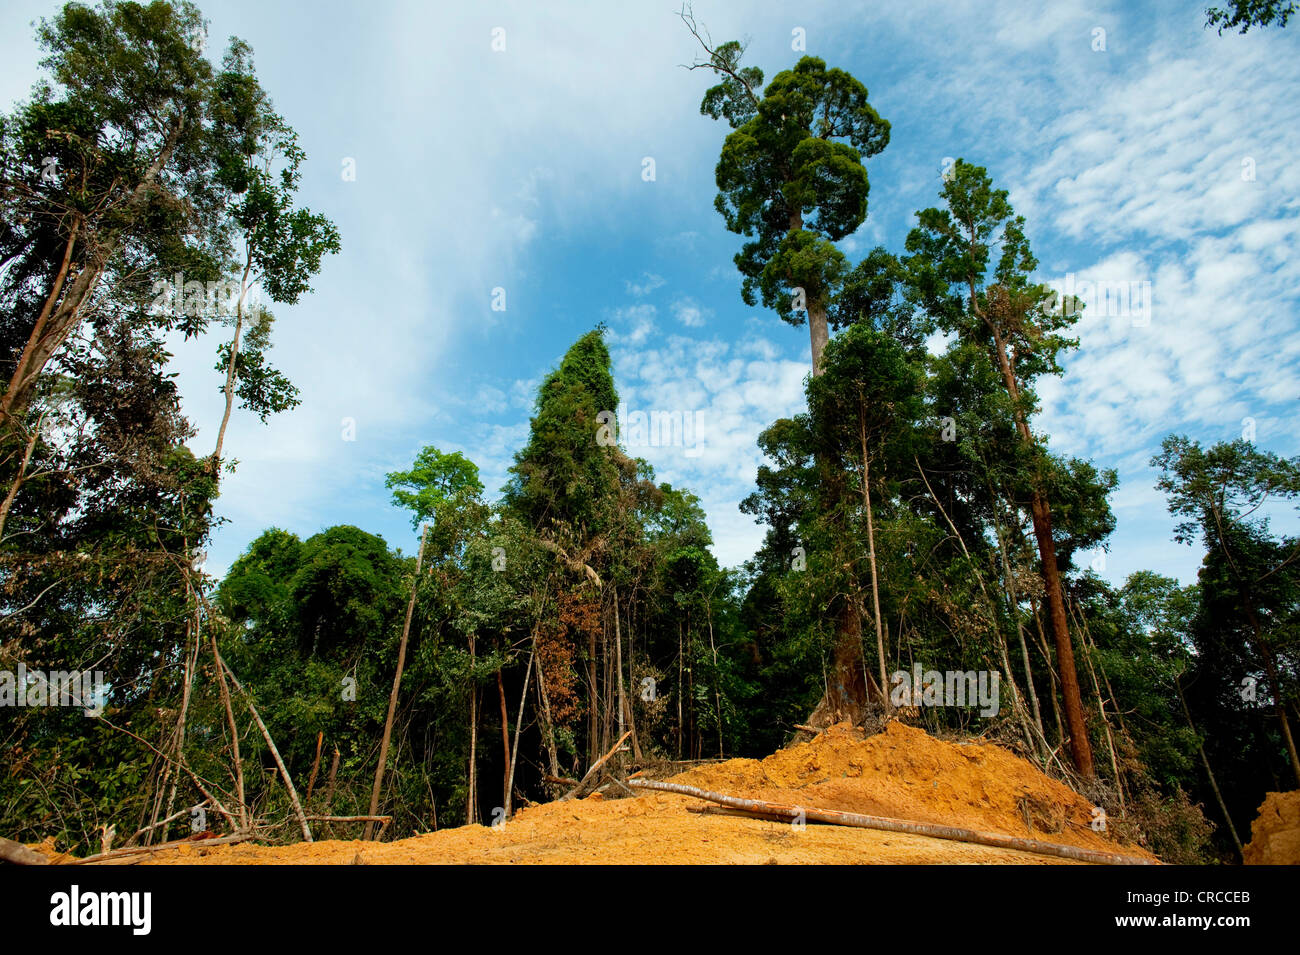 Deforestation of rainforest, South East Asia. Stock Photo